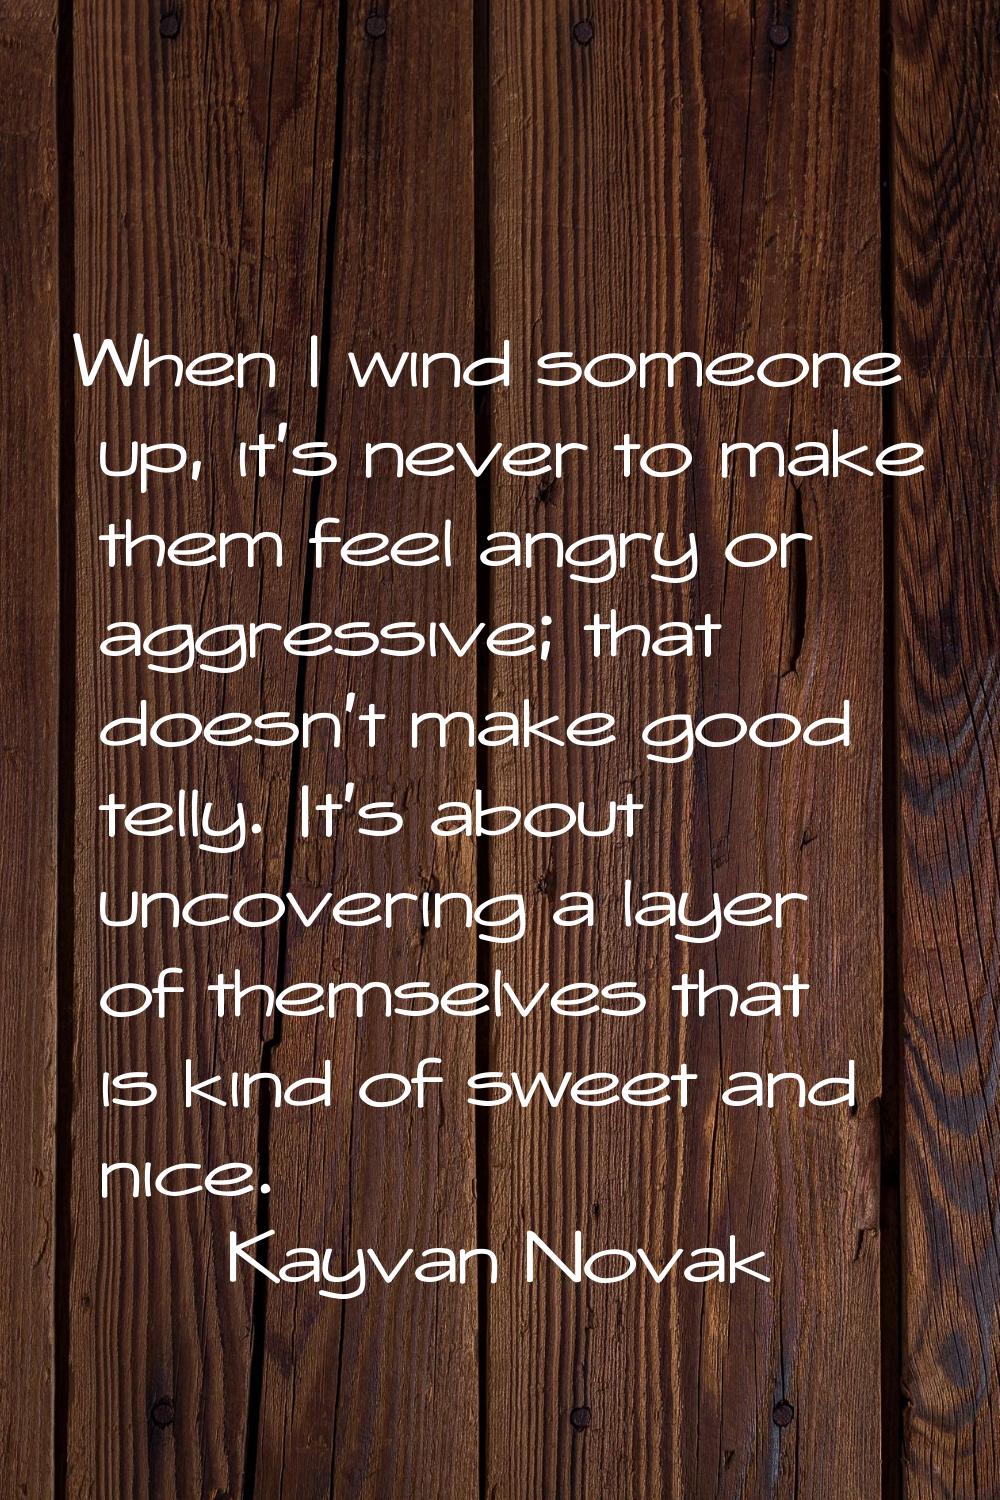 When I wind someone up, it's never to make them feel angry or aggressive; that doesn't make good te